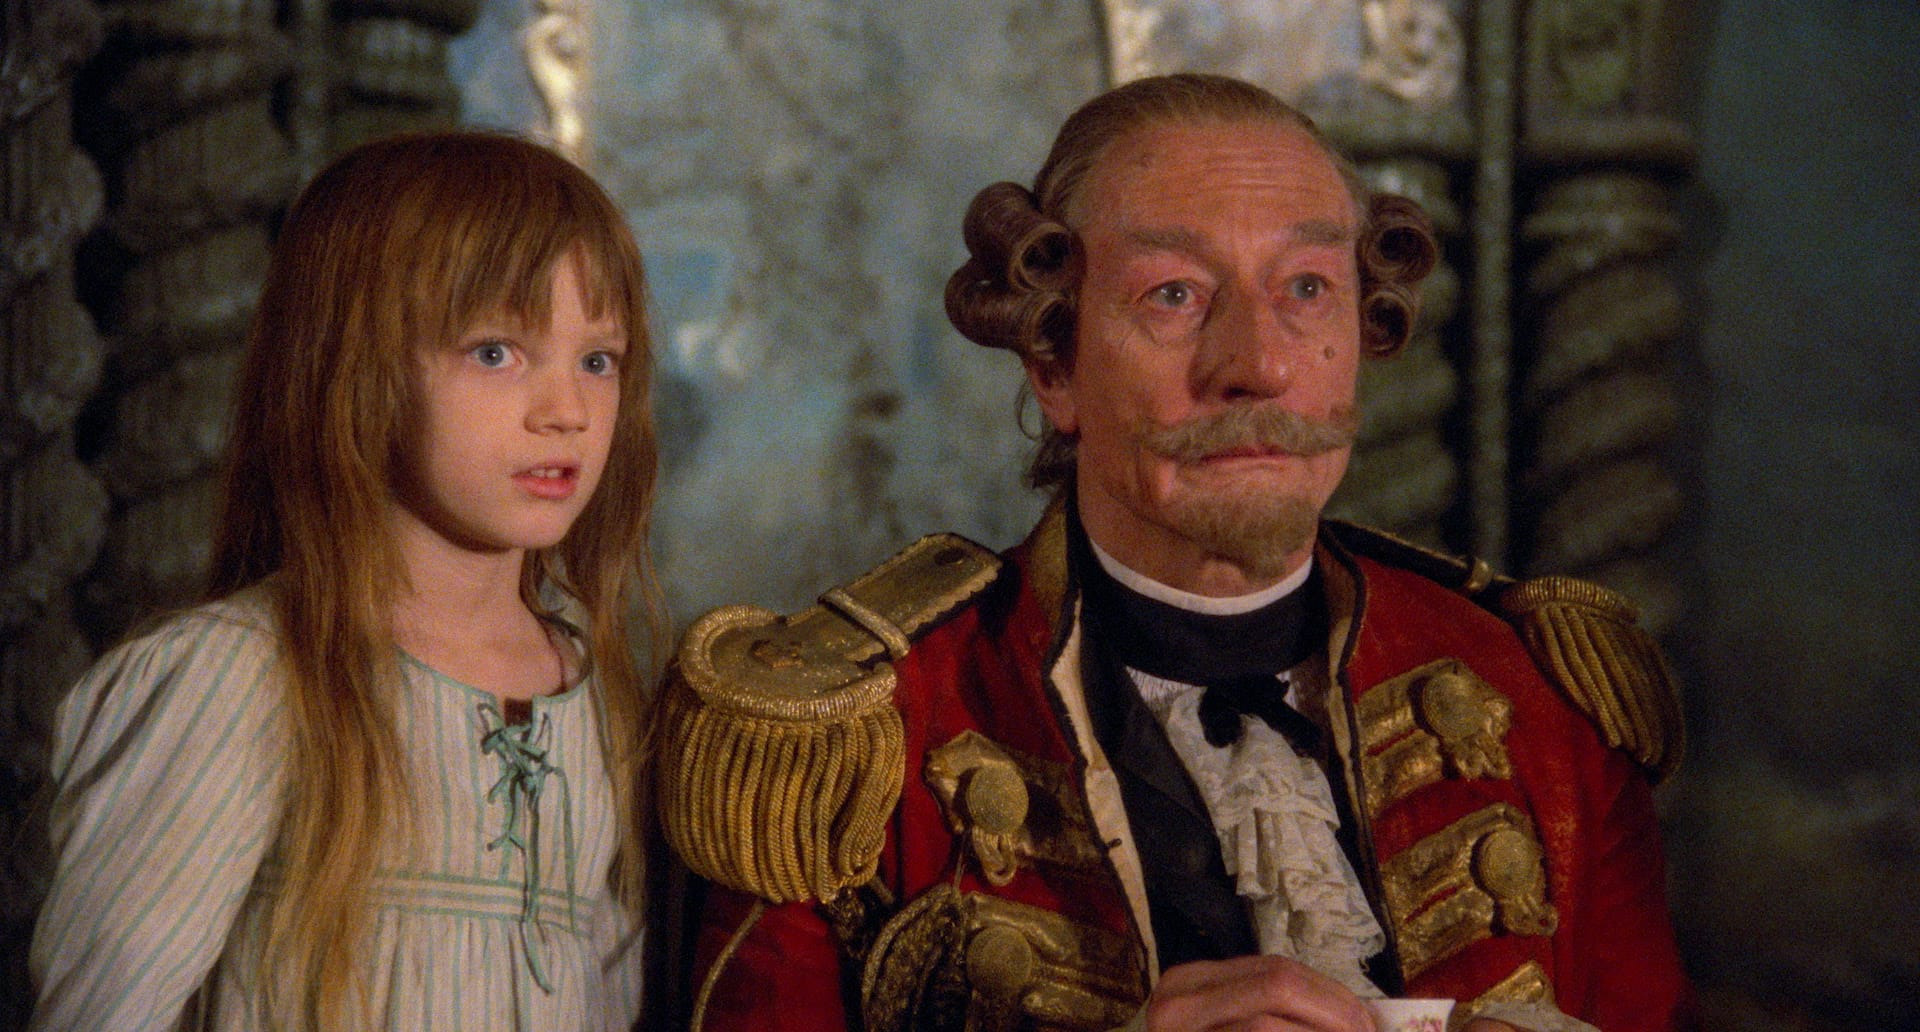 Sarah Polley and John Neville in The Adventures of Baron Munchausen